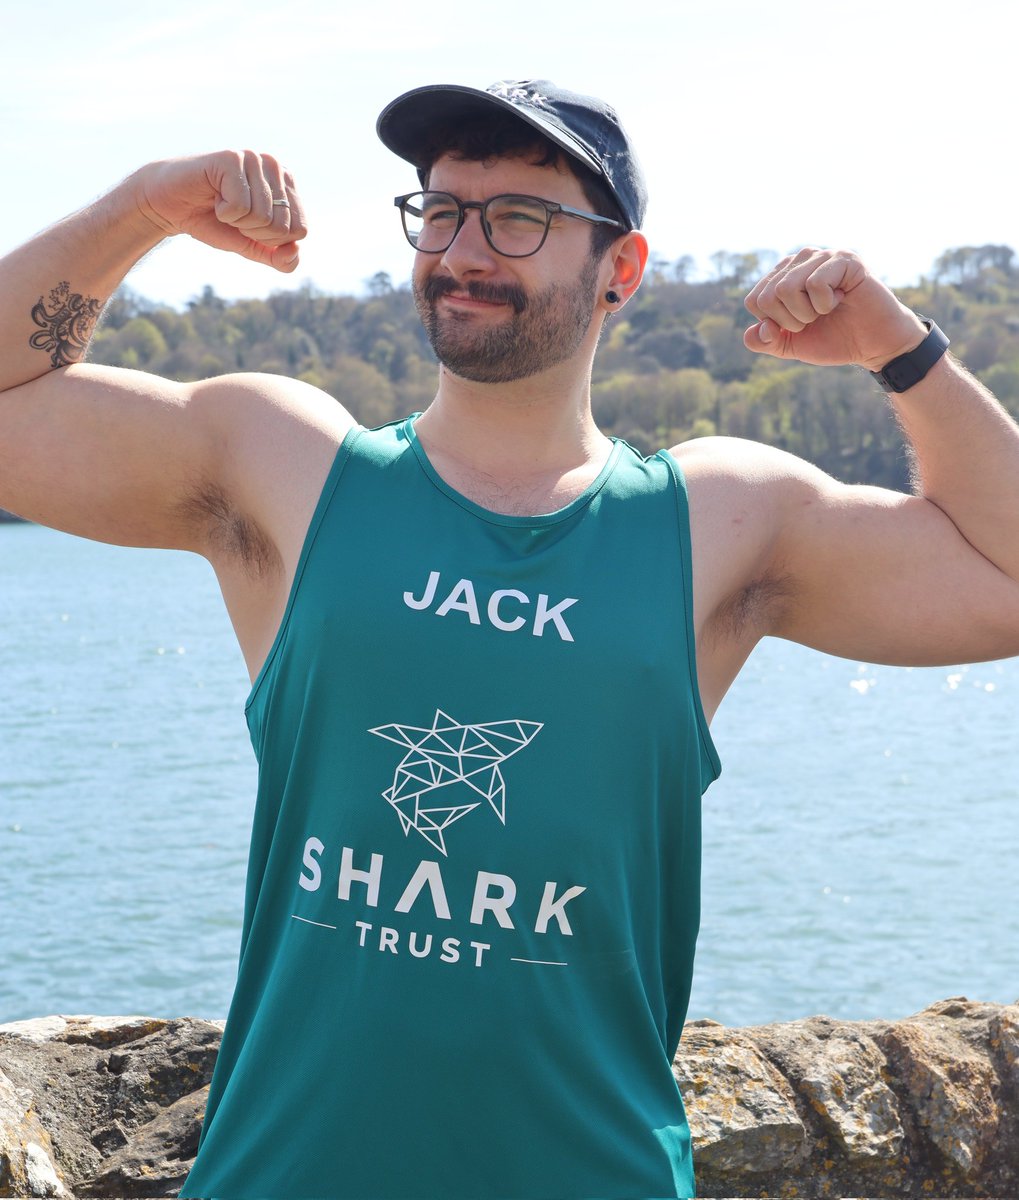 I'm running the @Run_plymouth Half Marathon this Sunday to raise money for @SharkTrustUK! If you donate through the #GreenMatchFund then all donations will be doubled, but today is your last full day to do so before it closes! Link to donate here: donate.biggive.org/campaign/a0569…